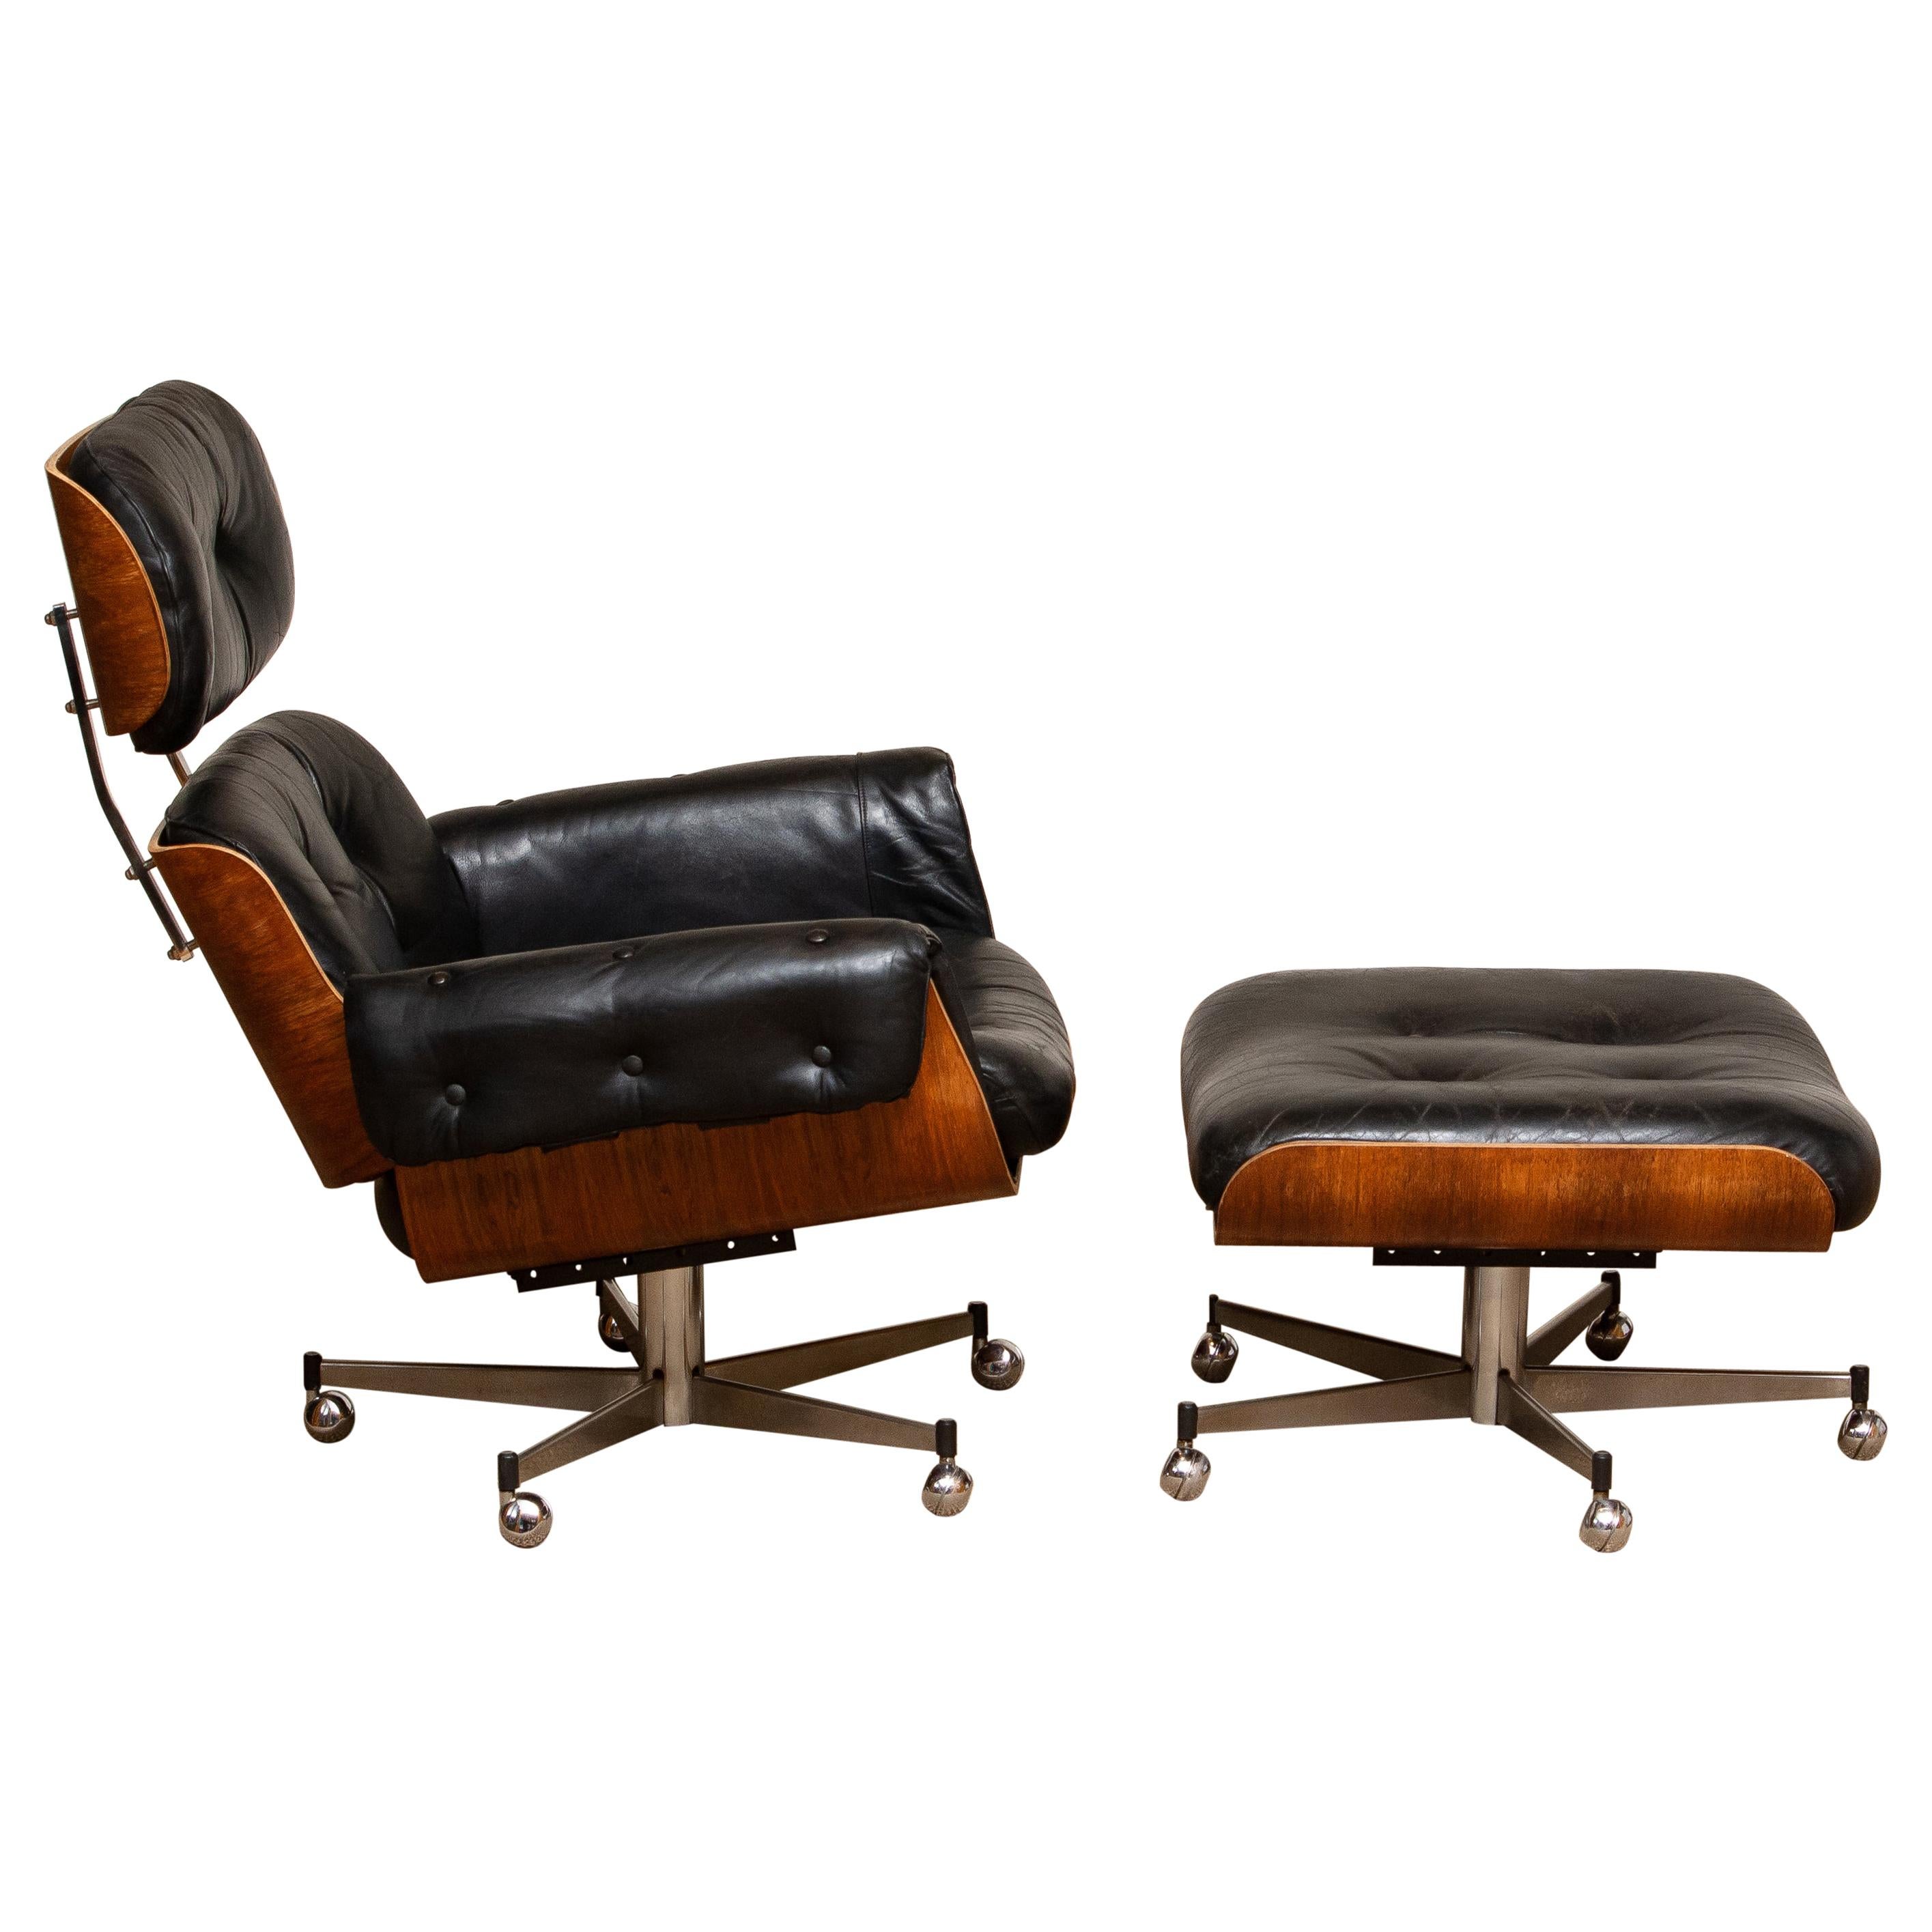 Iconic recliner / swivel chair designed by Martin Stoll for Giroflex Stoll of Switzerland, this gorgeous recliner offers the same iconic panels of bent plywood then the famous lounge chair by Ray and Charles Eames. Chair and ottoman allover in good